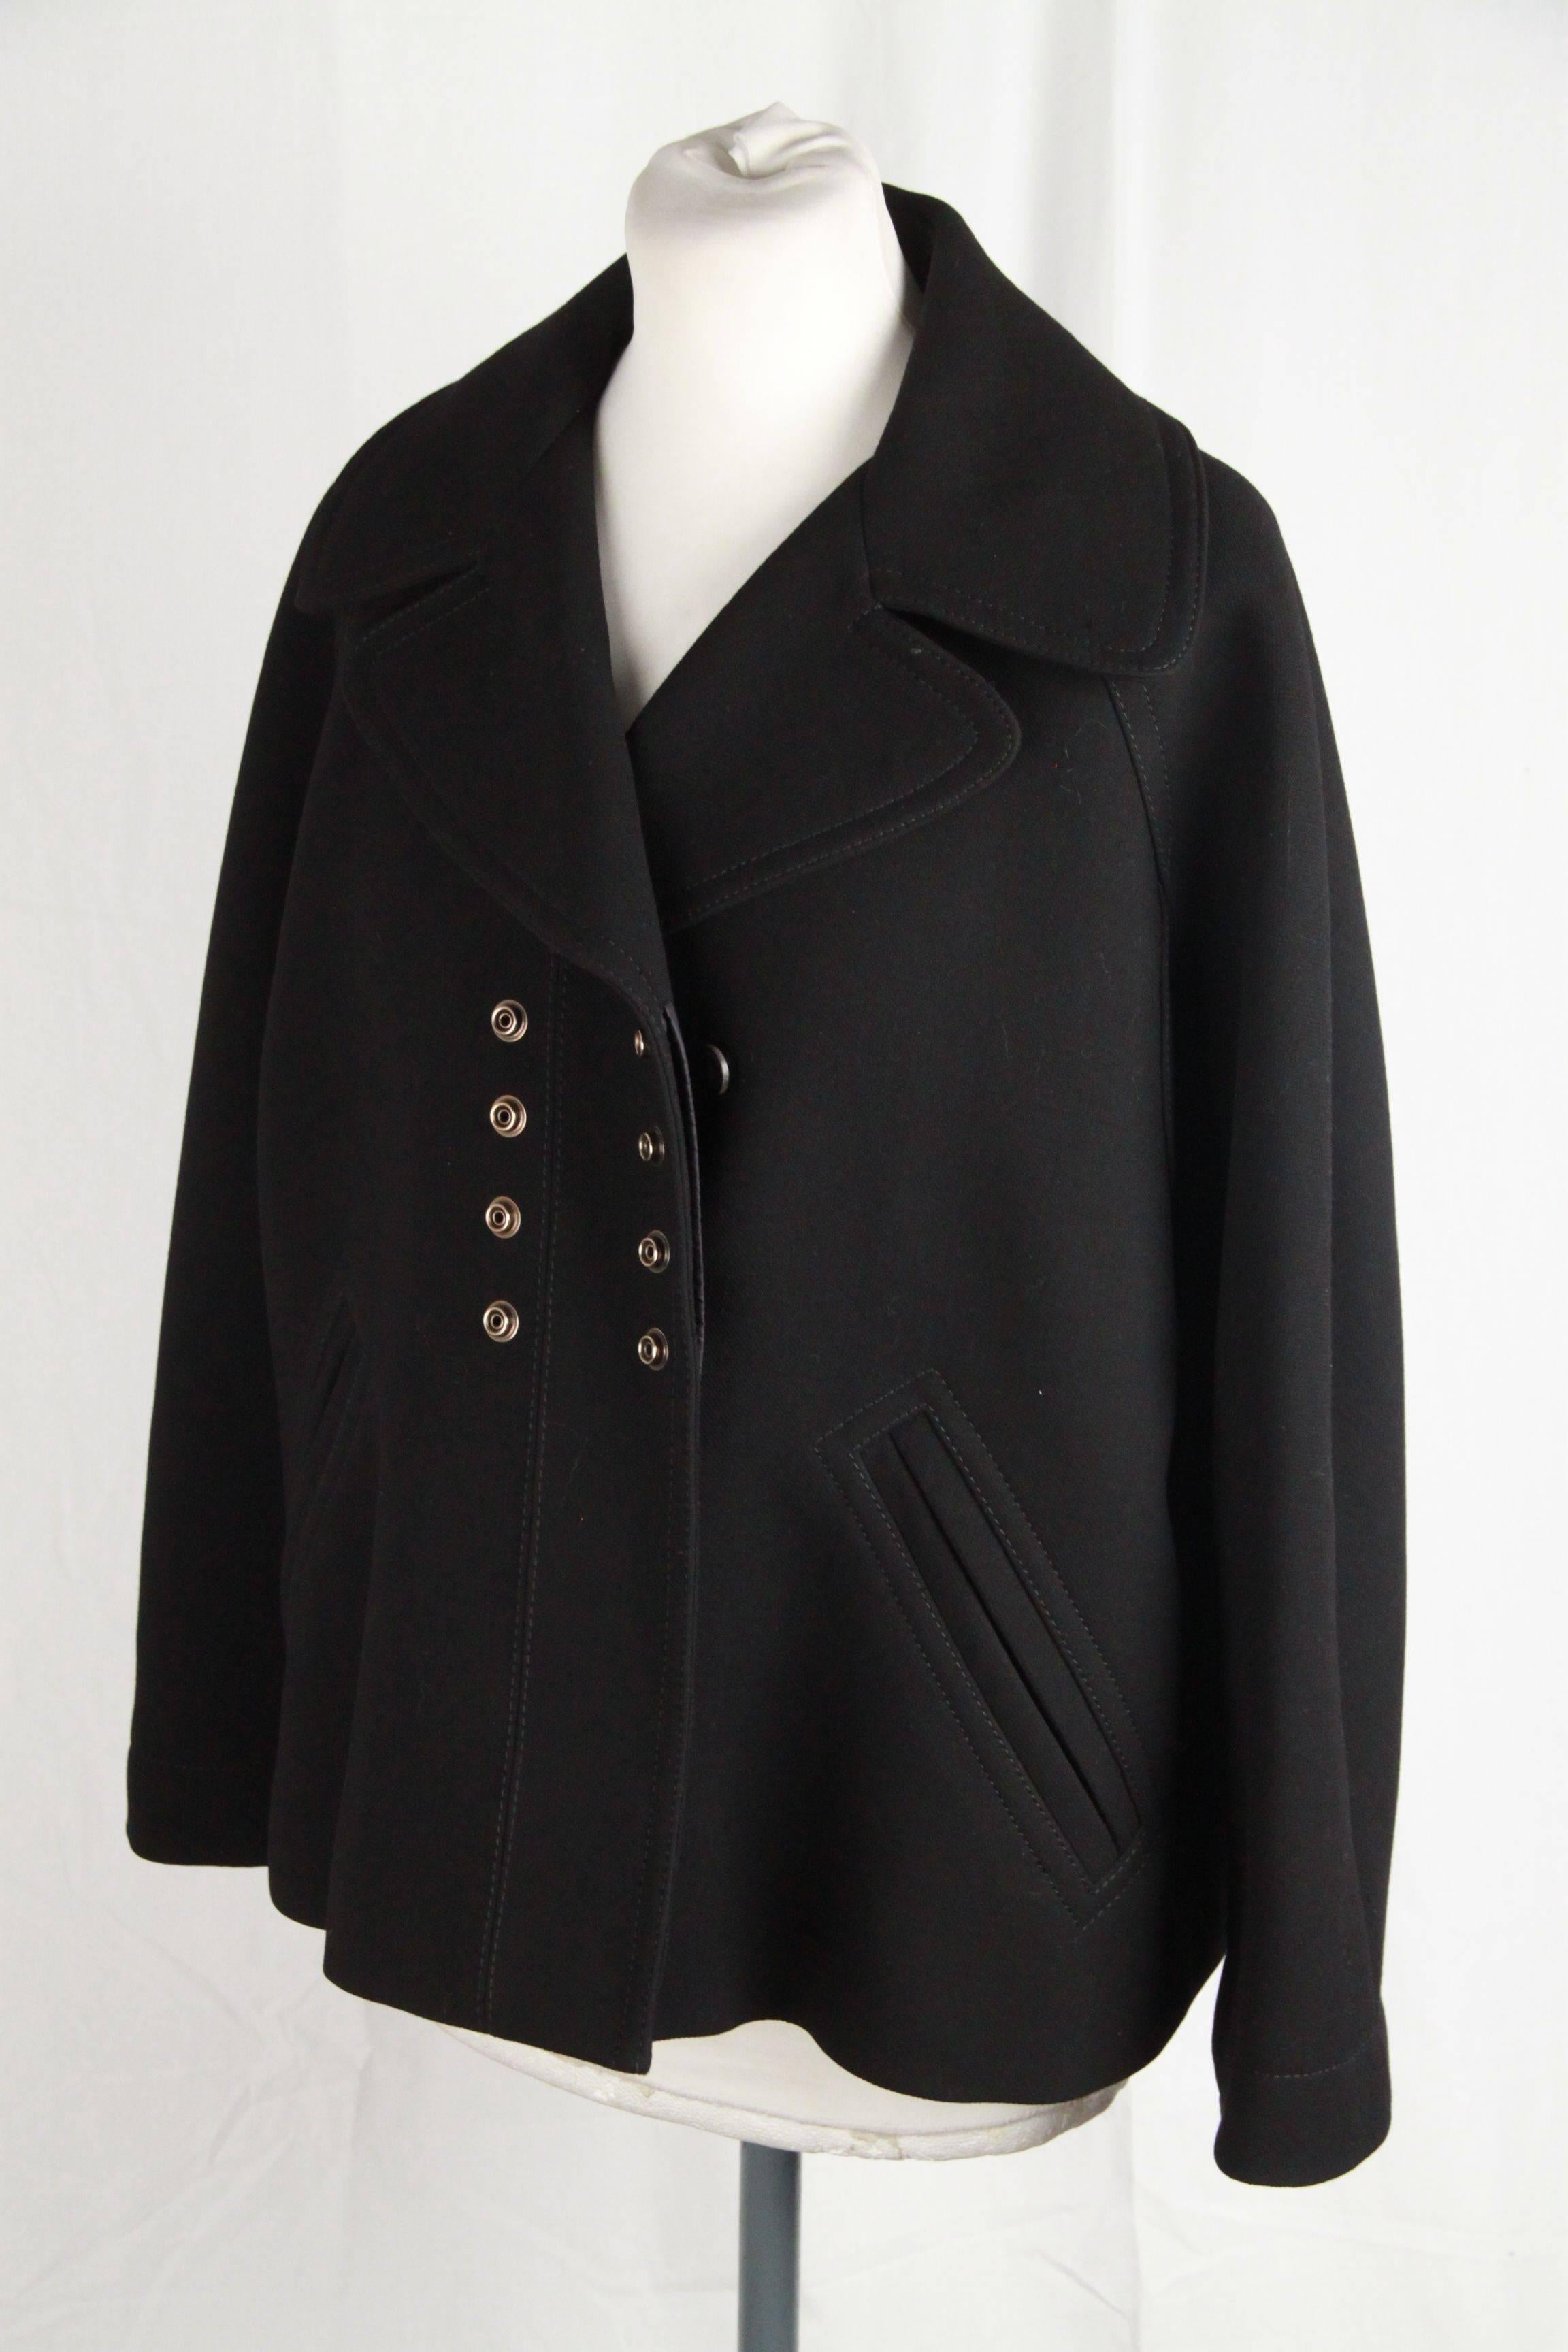 GUCCI Black Wool PEACOAT Pea Coat JACKET Caban SIZE 38 In Excellent Condition In Rome, Rome